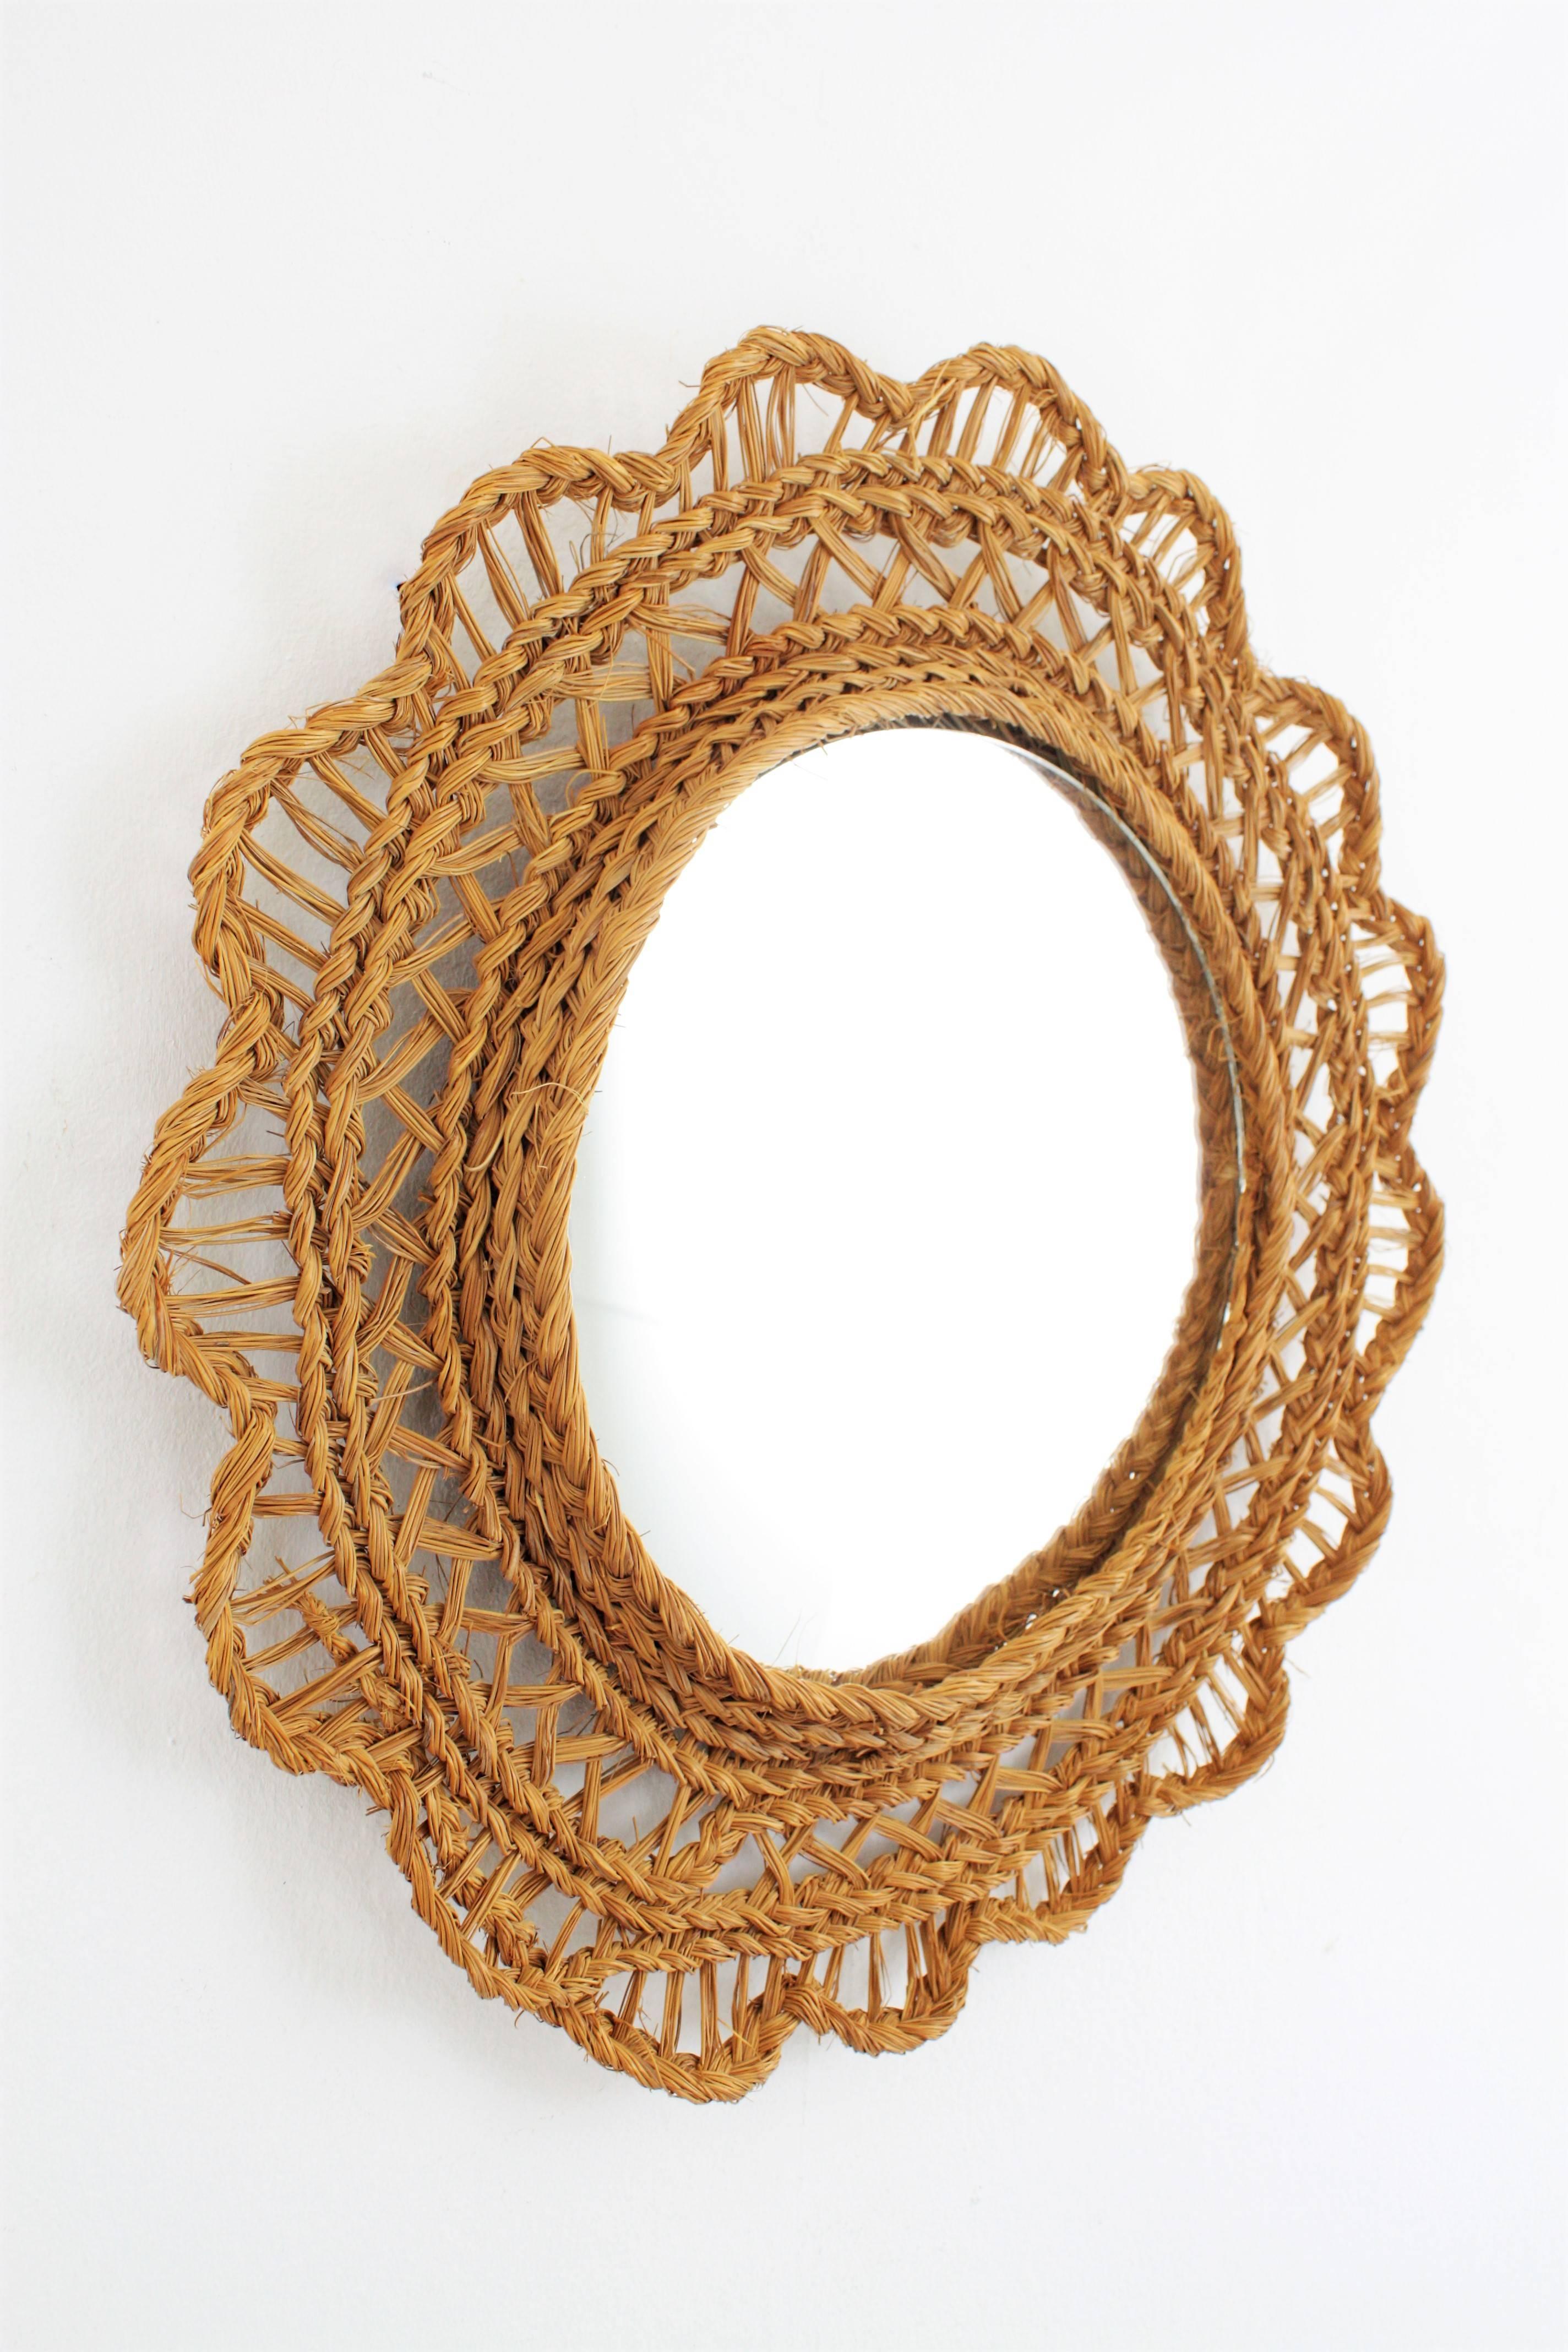 Lovely handcrafted esparto natural fiber mirror. Flower shaped esparto grass handwoven decorative frame surrounding a circular glass. Lovely to add a fresh touch to a beach or cottage house, Spain, 1950s-1960s.
Glass dimensions: 29cm